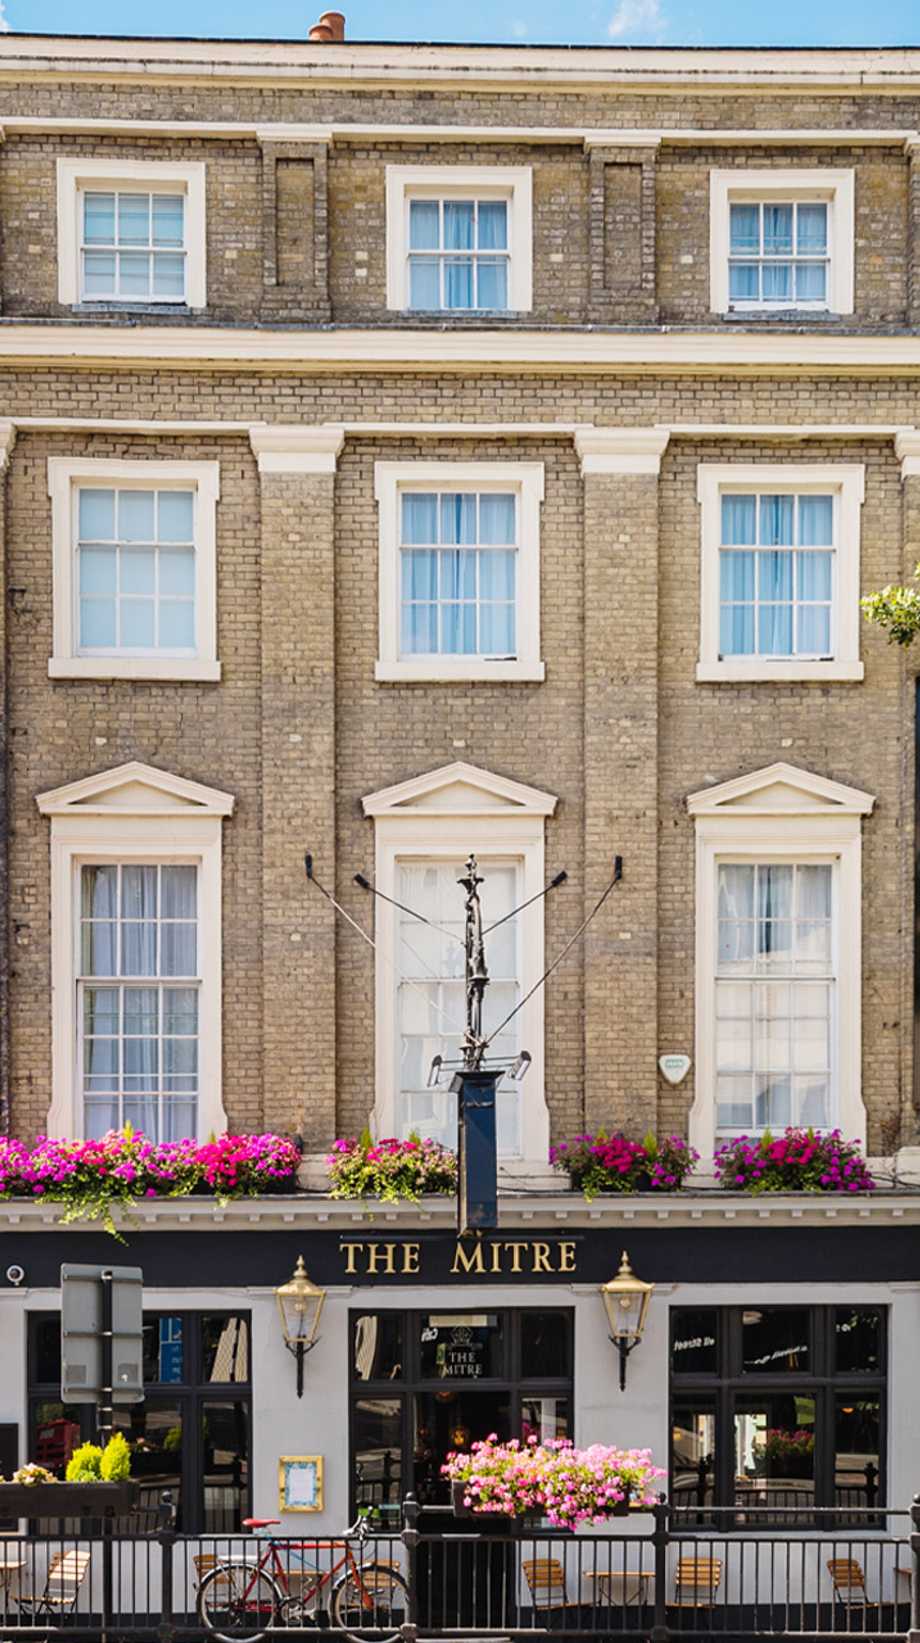 An exterior shot of Innkeeper's Collection's The Mitre hotel in London, surrounded by flowers, green trees, and a blue sky.